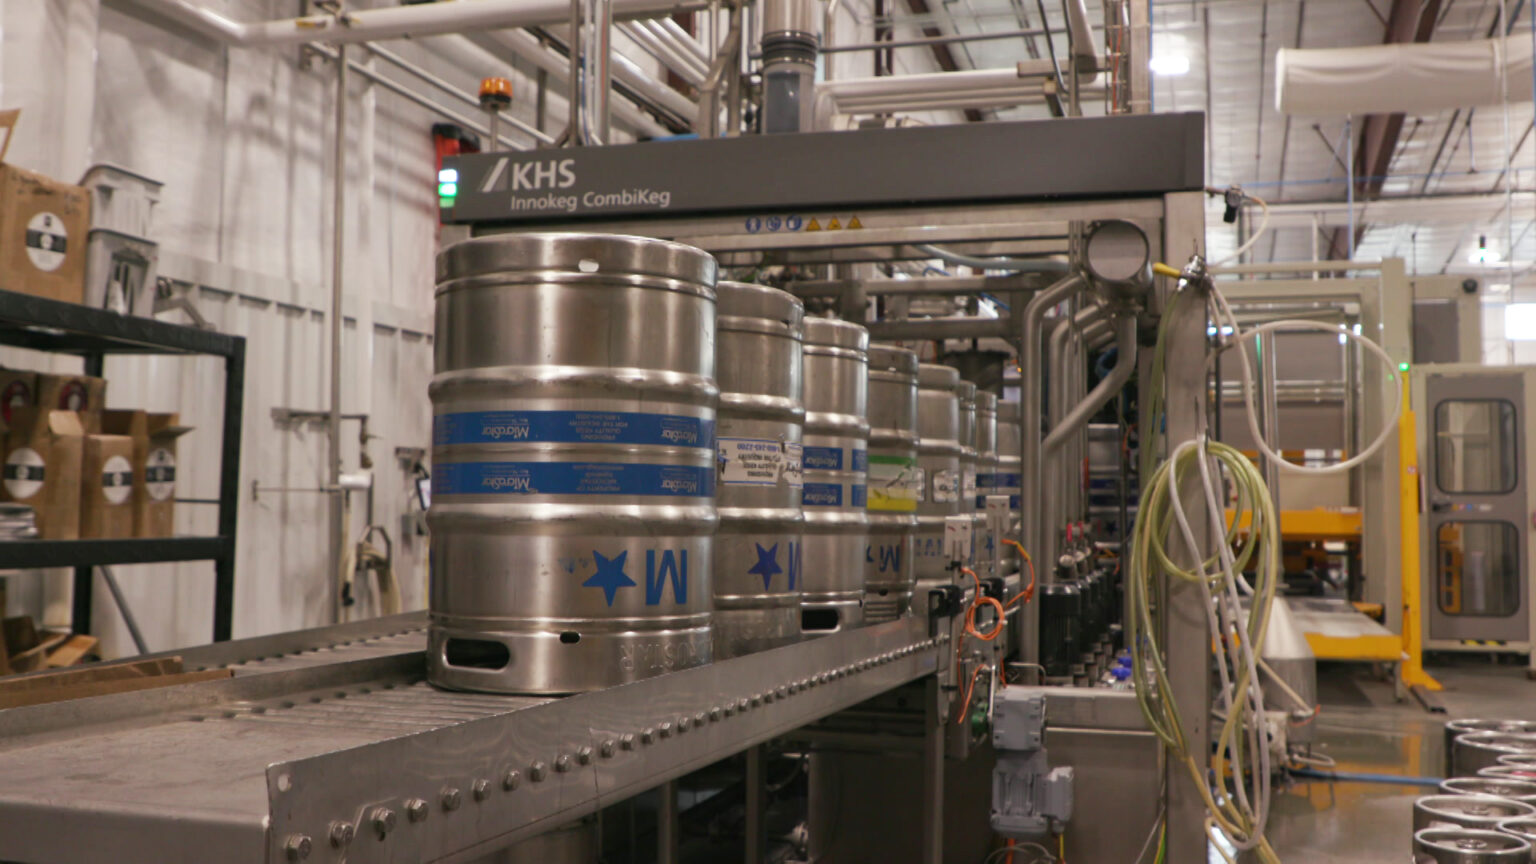 Multiple metal beer kegs move on rollers along a production line in a large room with industrial brewing equipment.